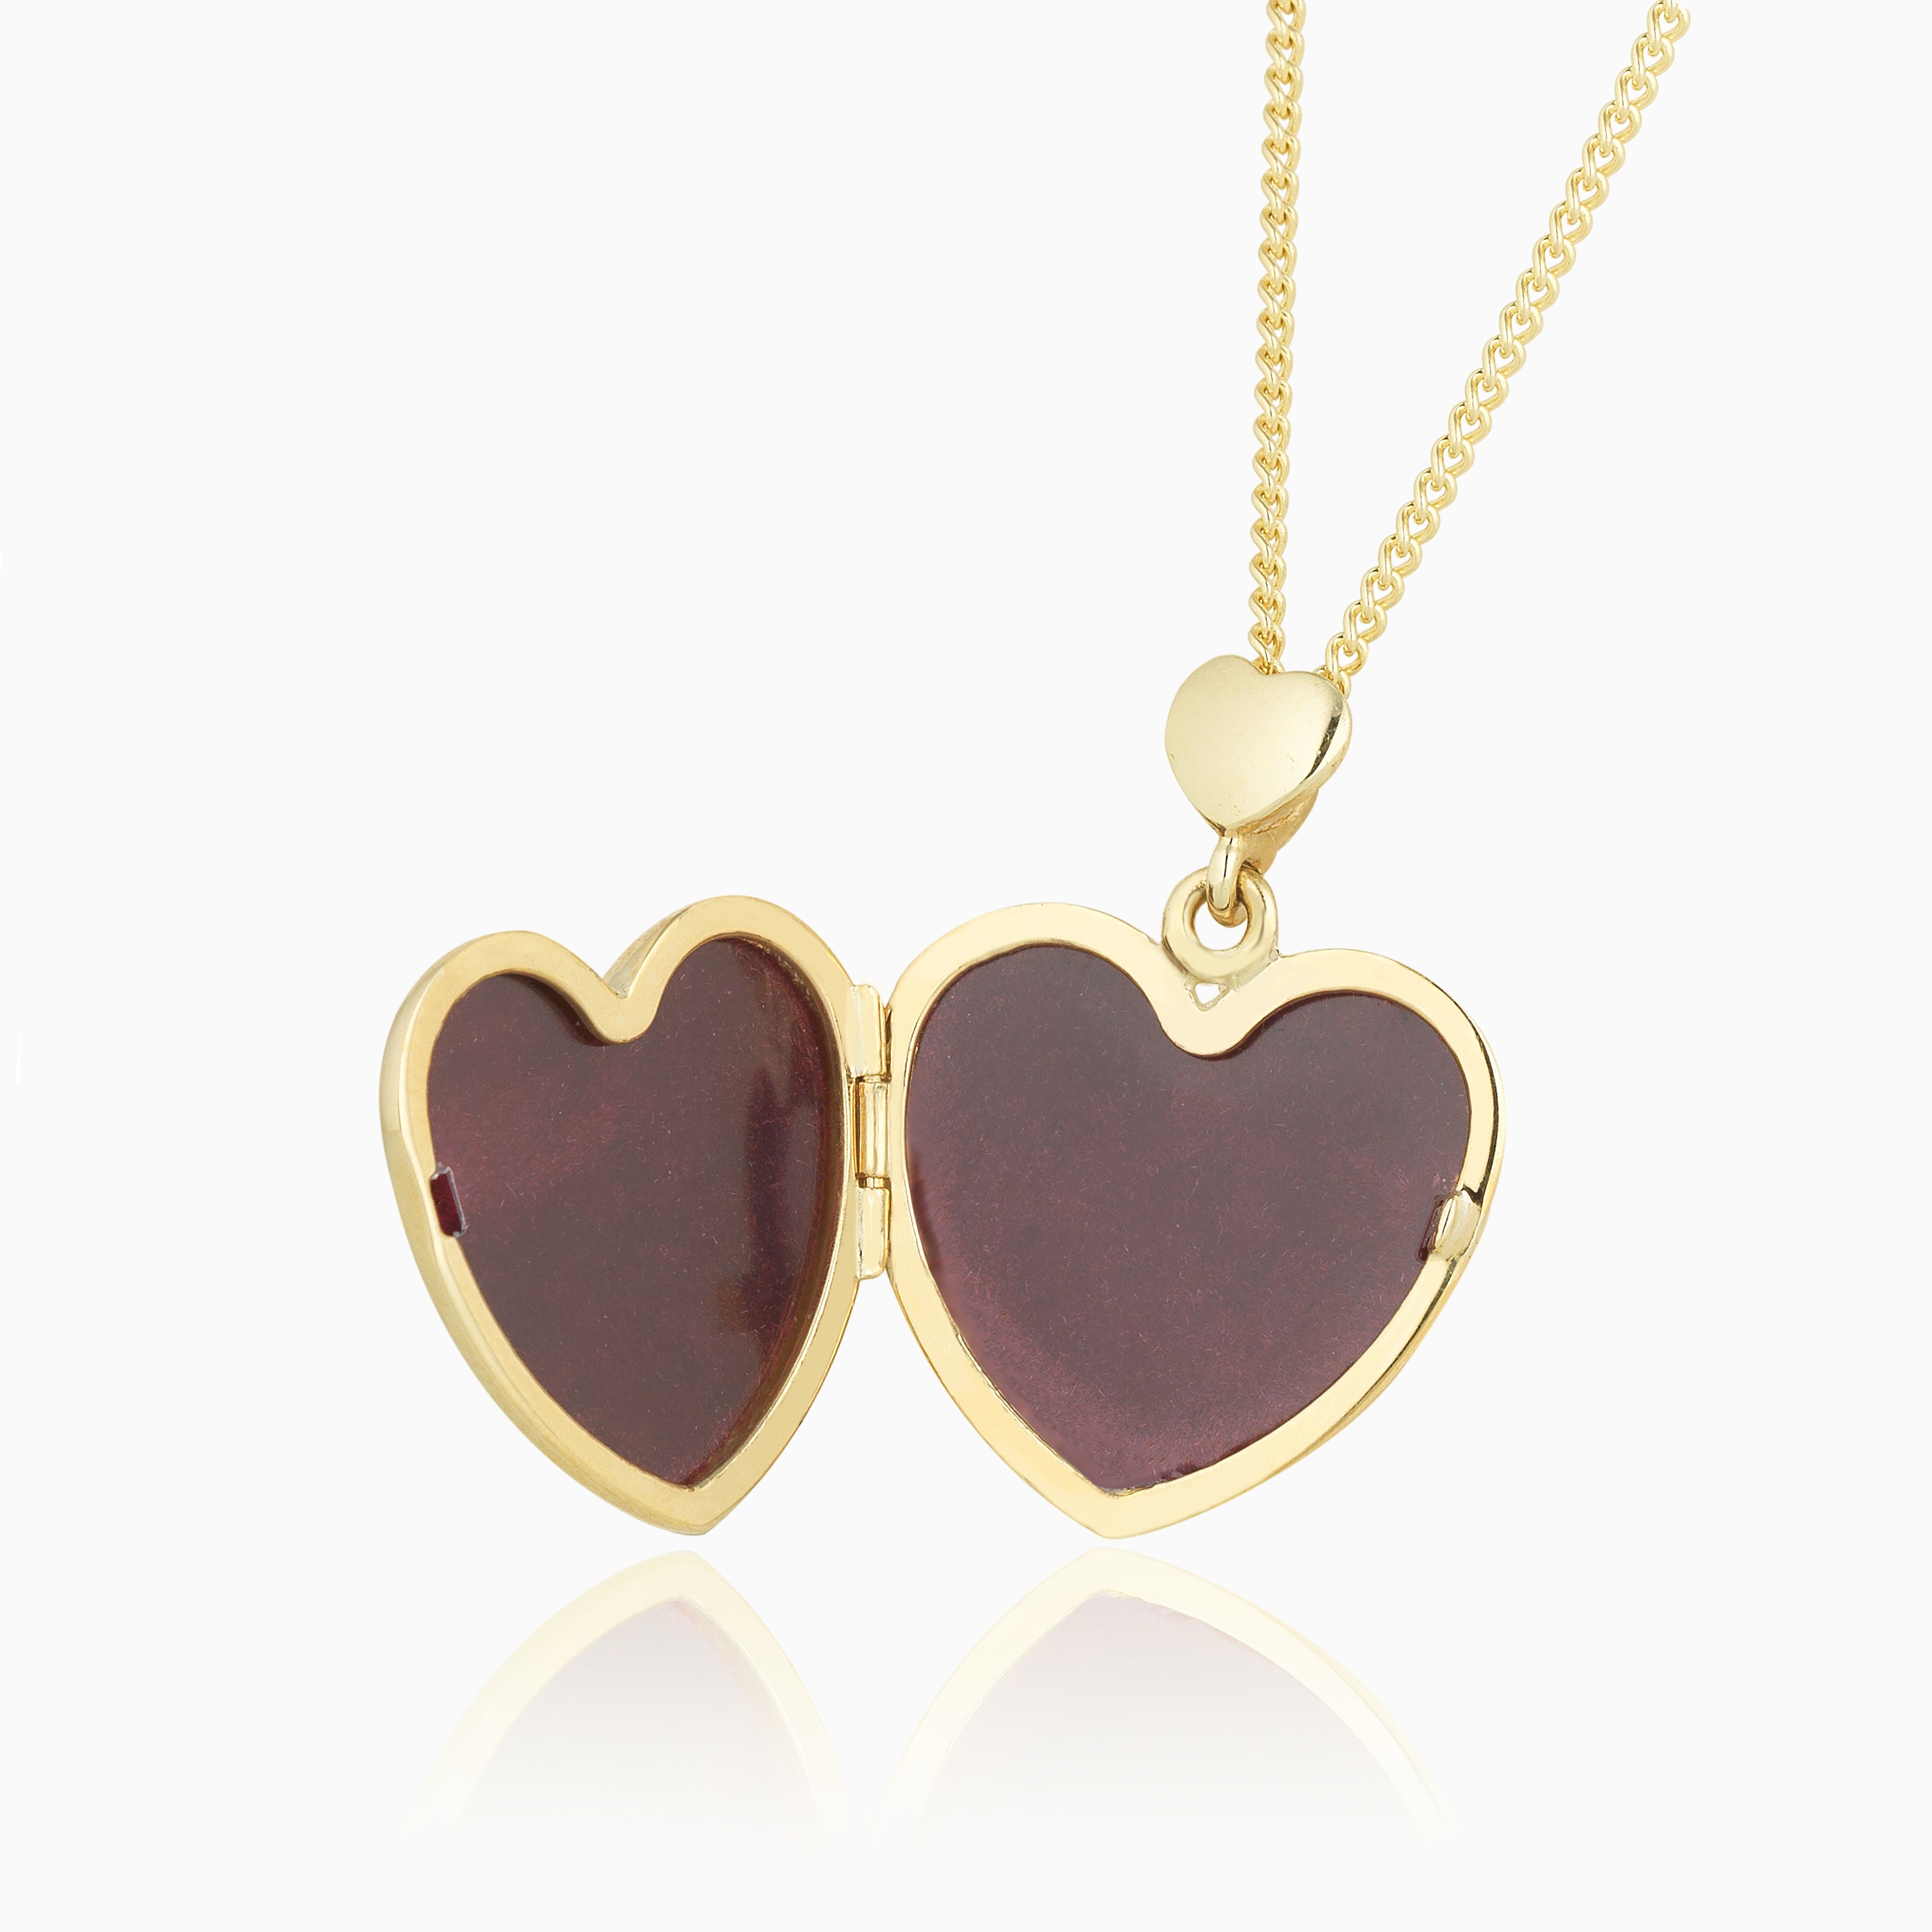 Product title: Premium Double Heart Locket, product type: Necklaces